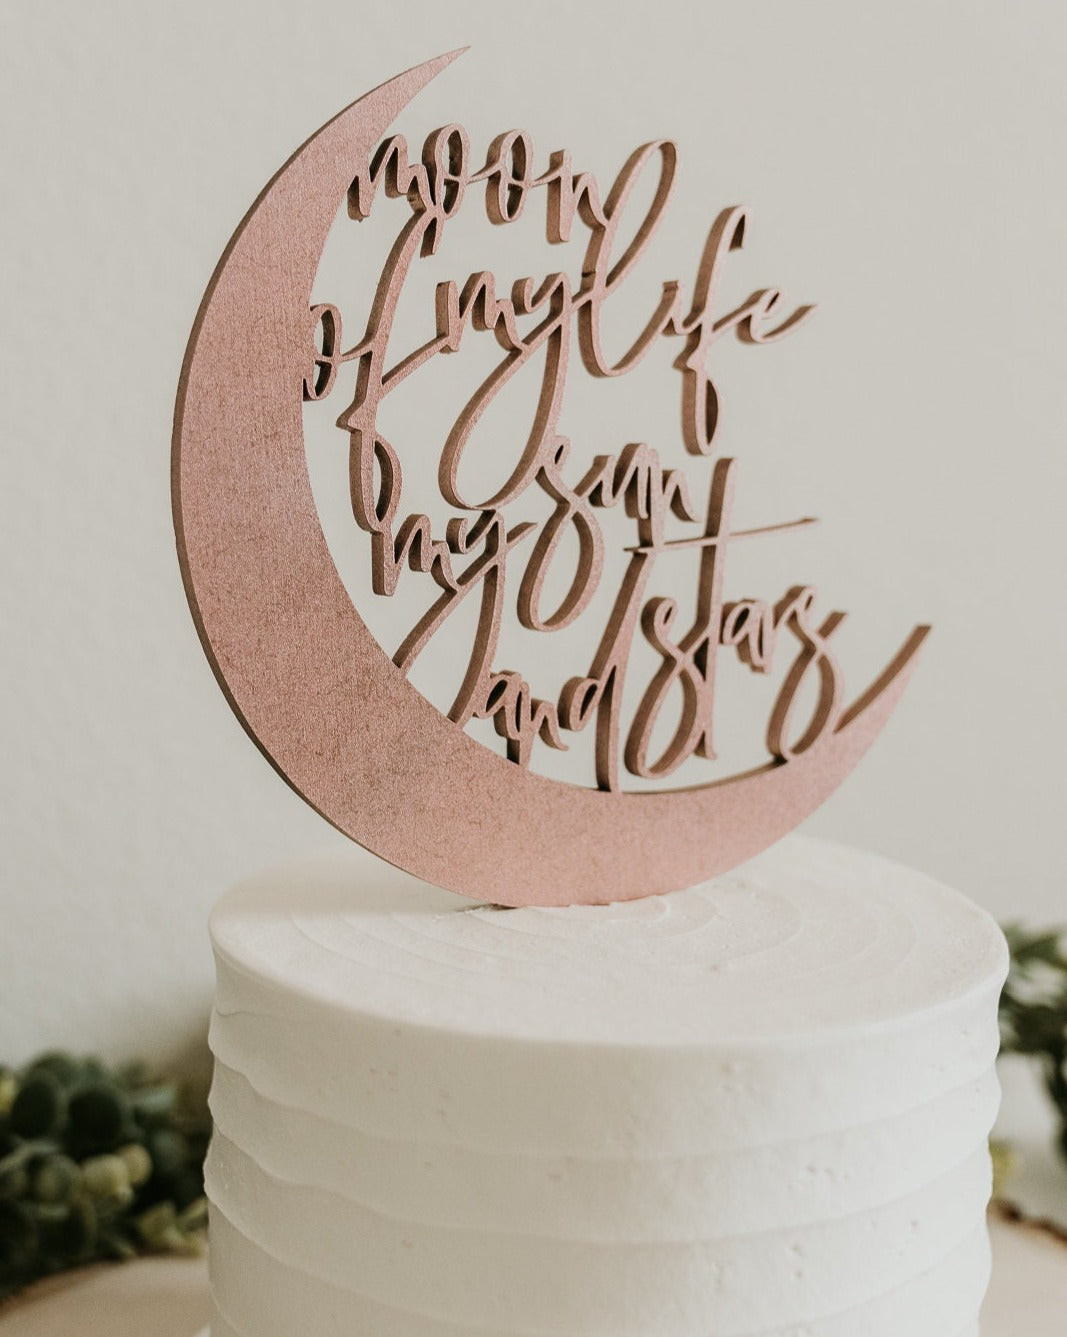 moon of my life my sun and stars cake topper, wedding cake topper, baby shower cake topper, moon cake topper, moon party decor